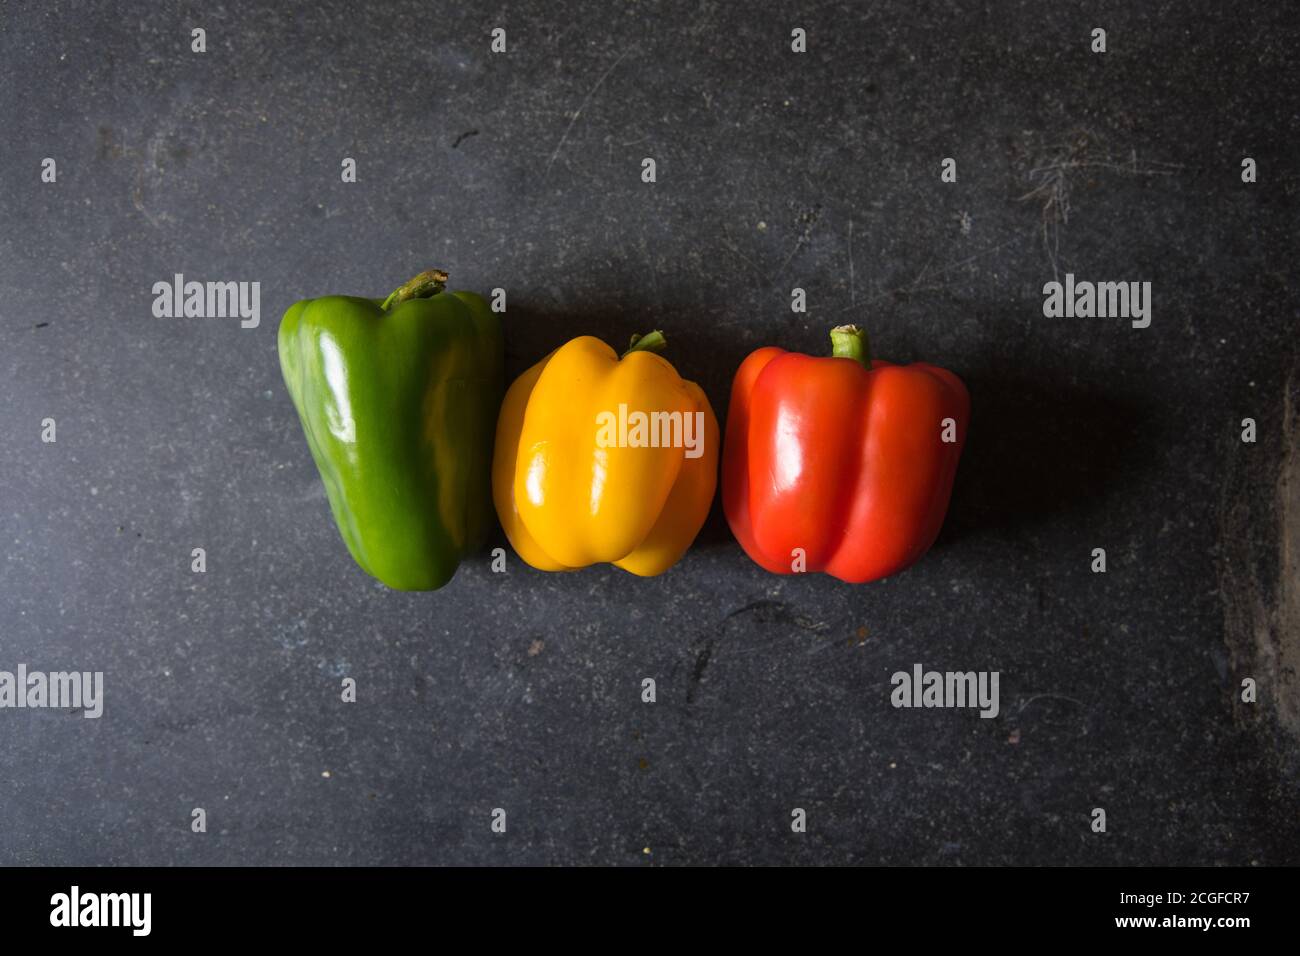 Top view of red yellow and green bell peppers on a black background Stock Photo